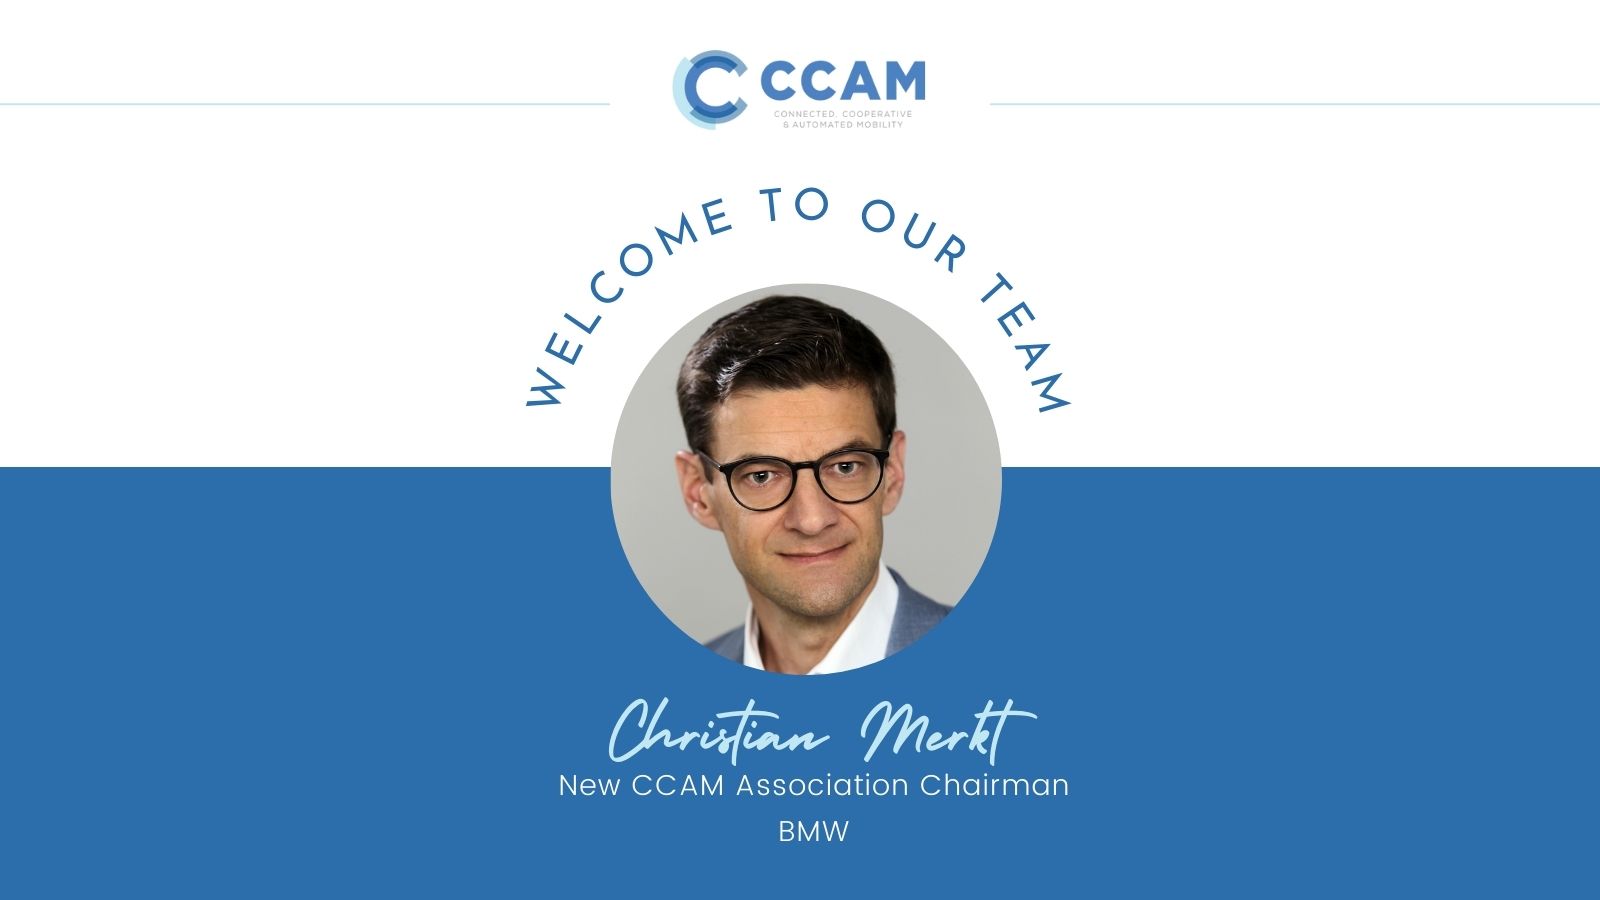 Welcome to our new Chairman, Christian Merkt